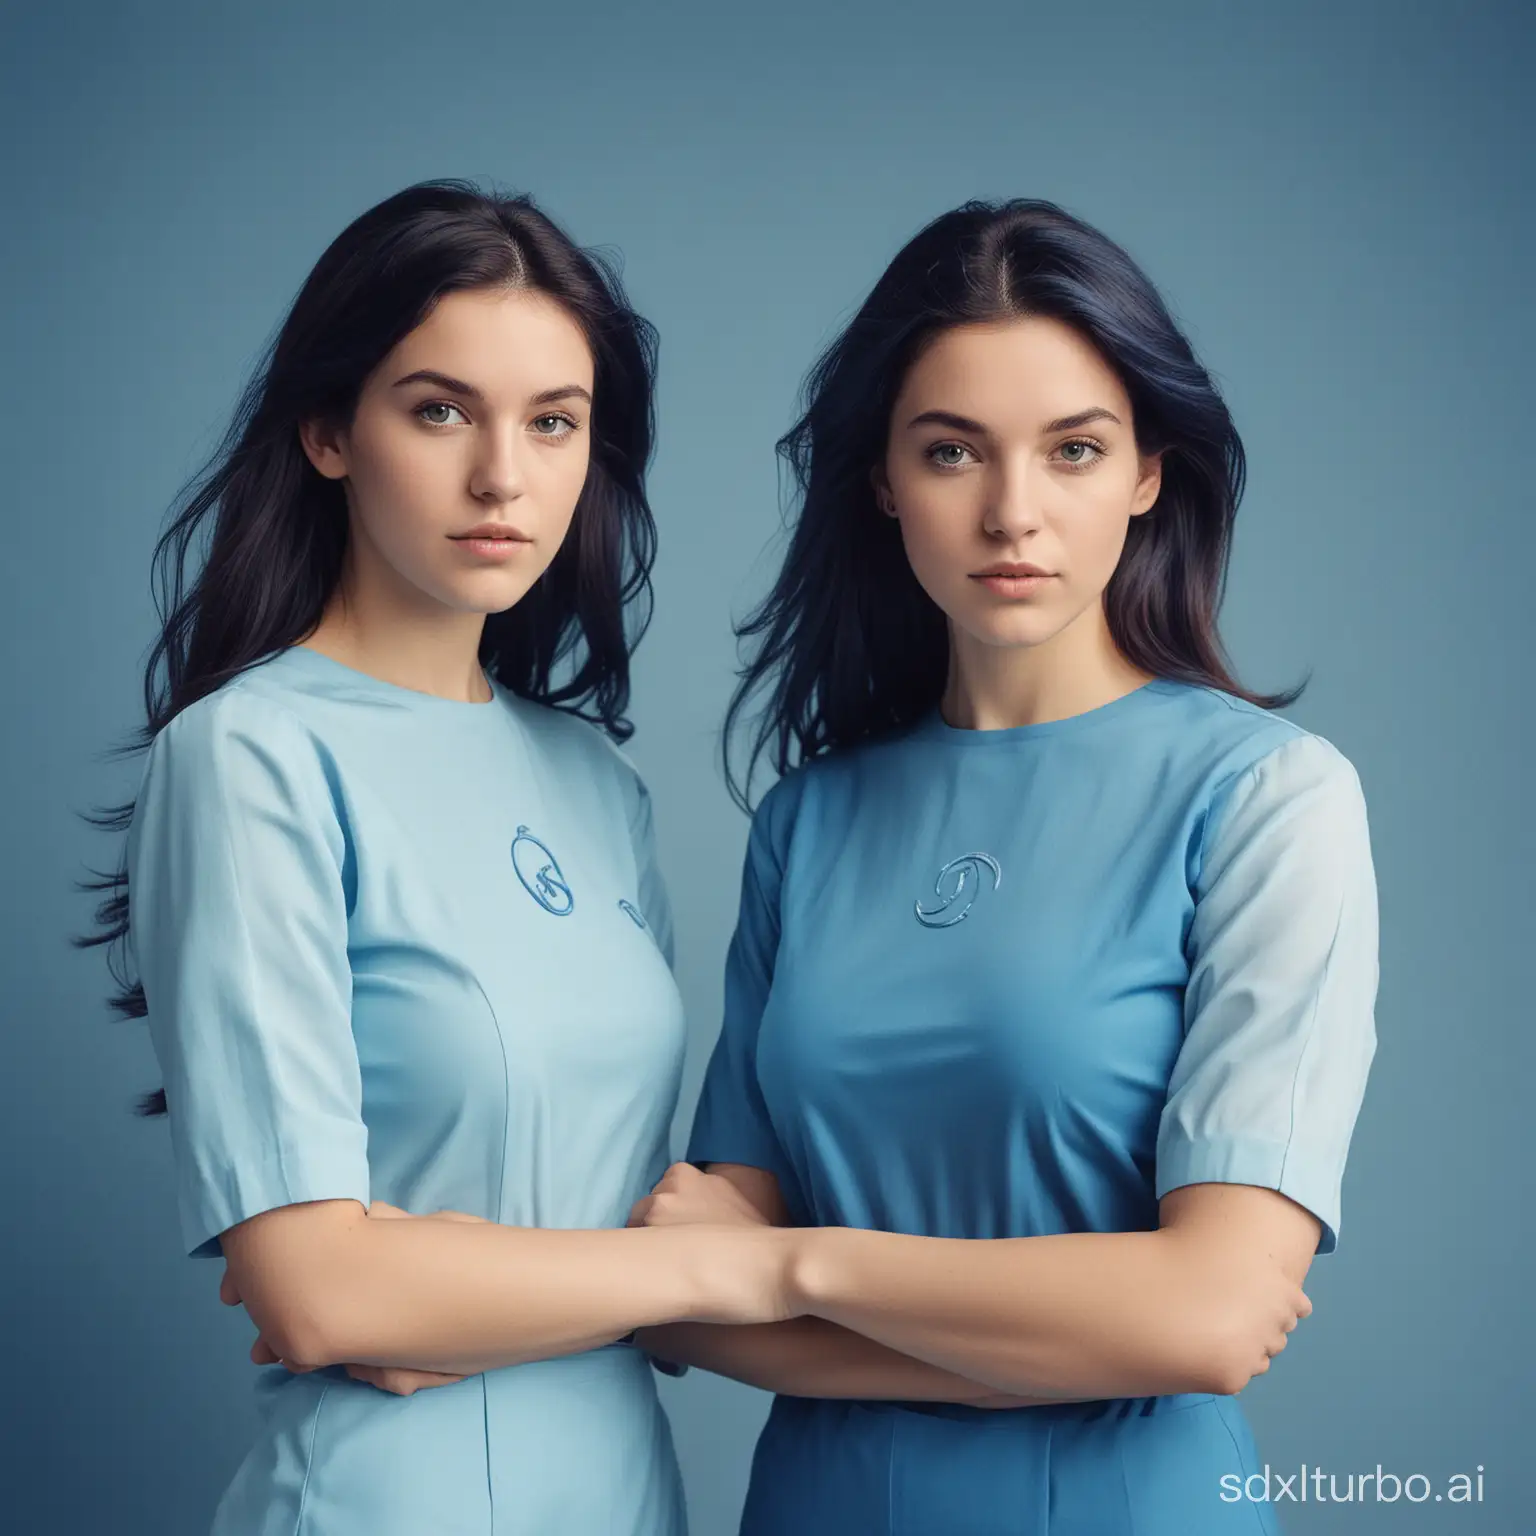 Take a photograph of two women who embody the Gemini zodiac sign, in a palette of blue colors, waist-up view